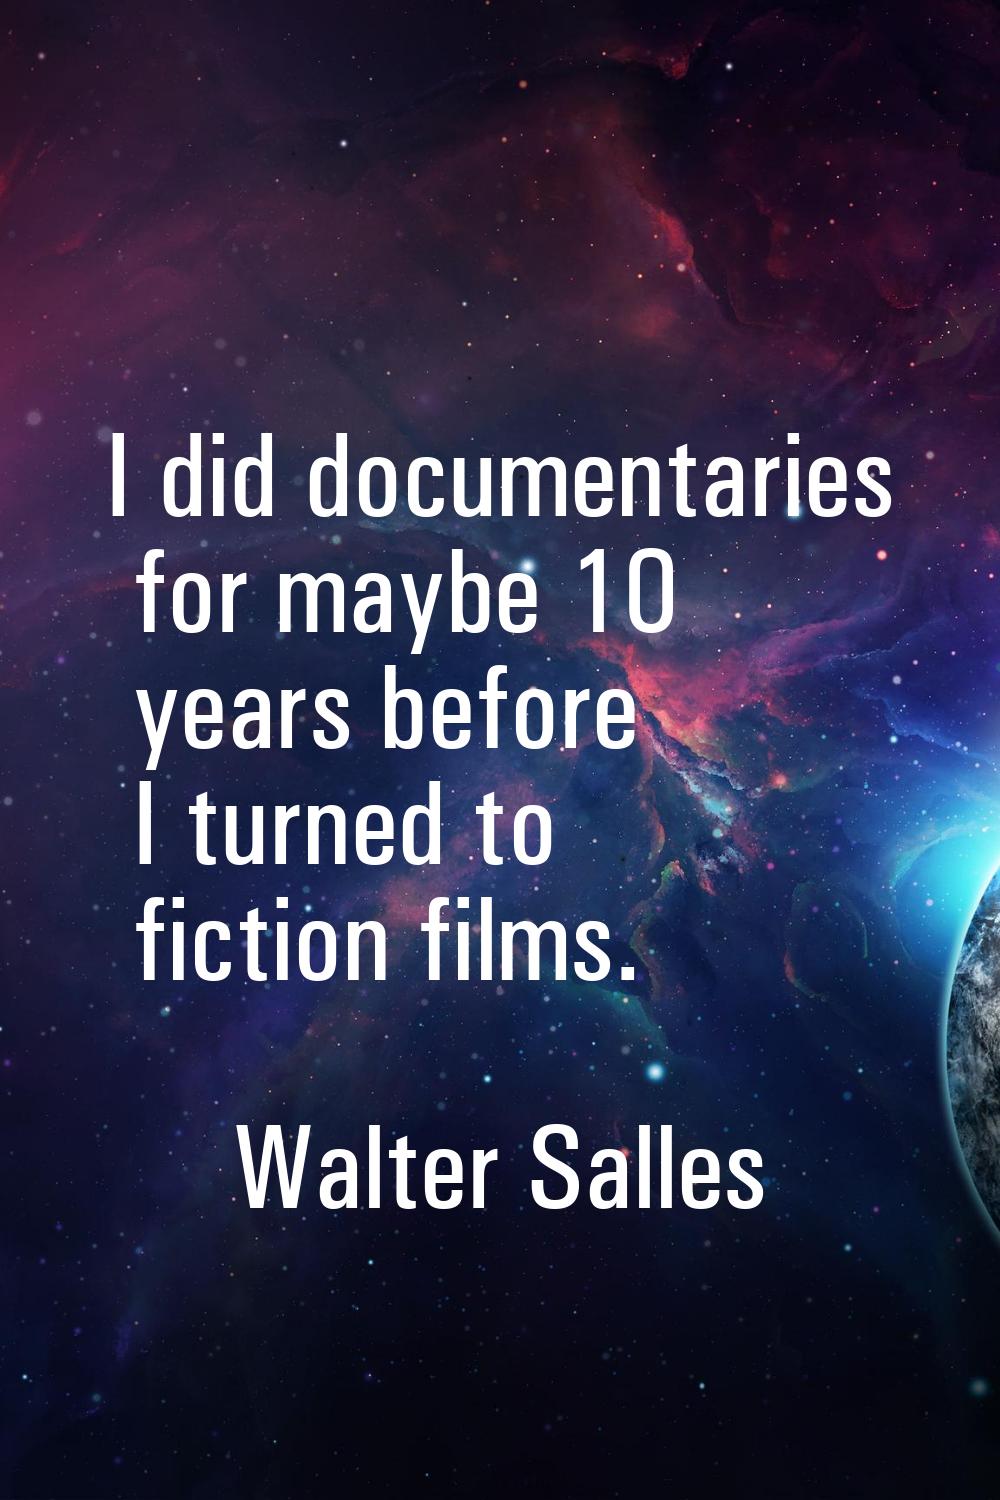 I did documentaries for maybe 10 years before I turned to fiction films.